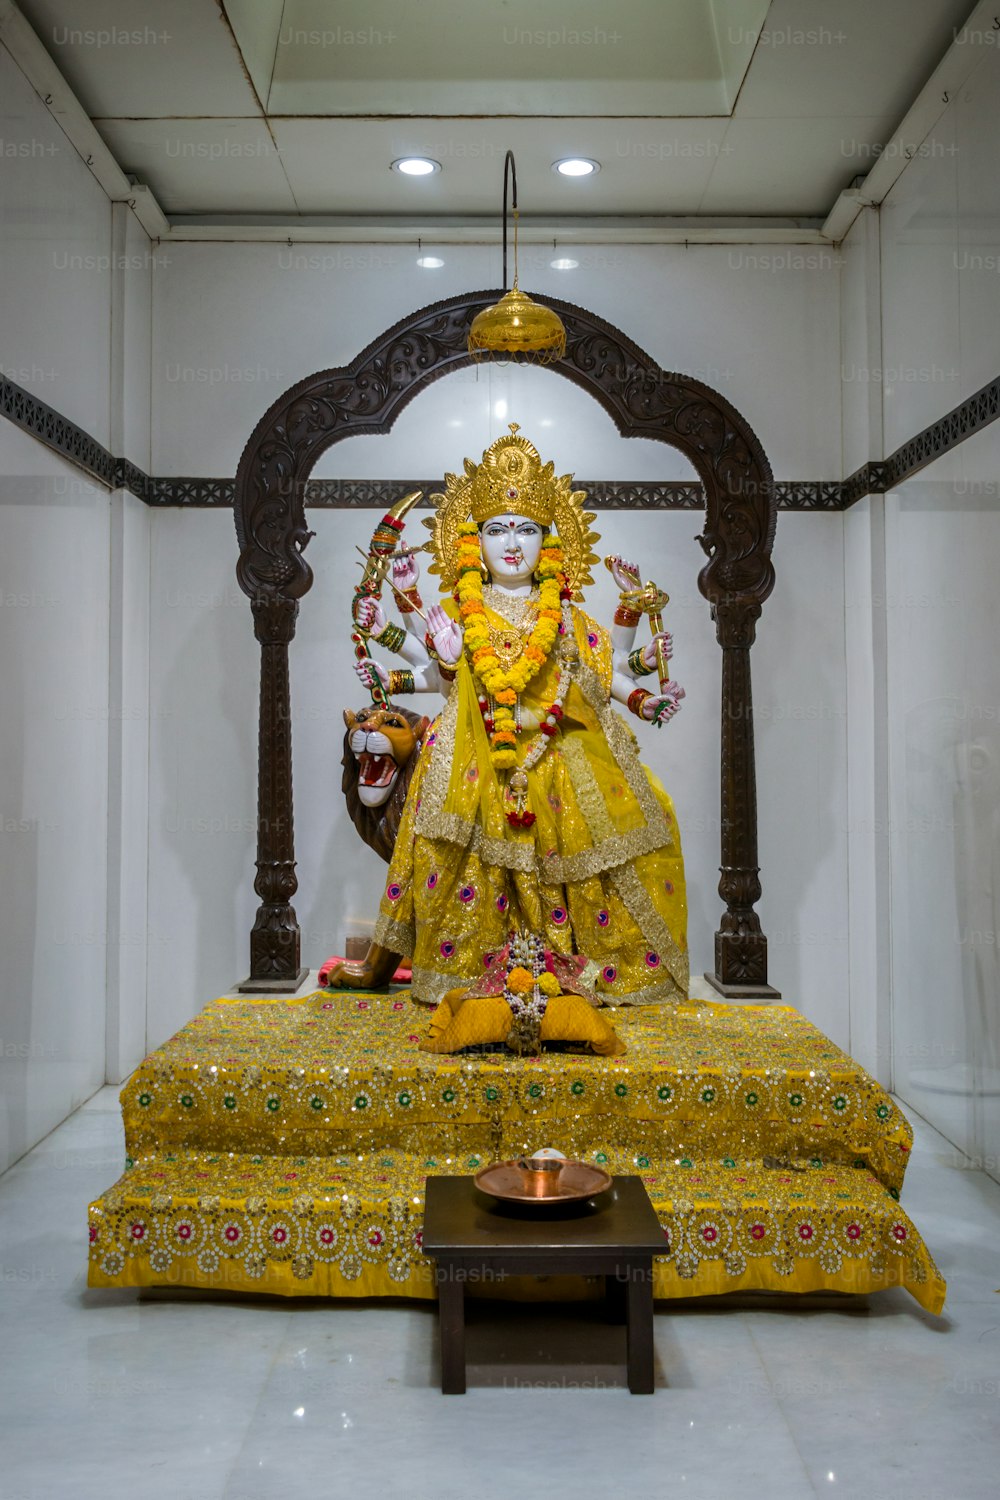 a statue of a hindu god in a room